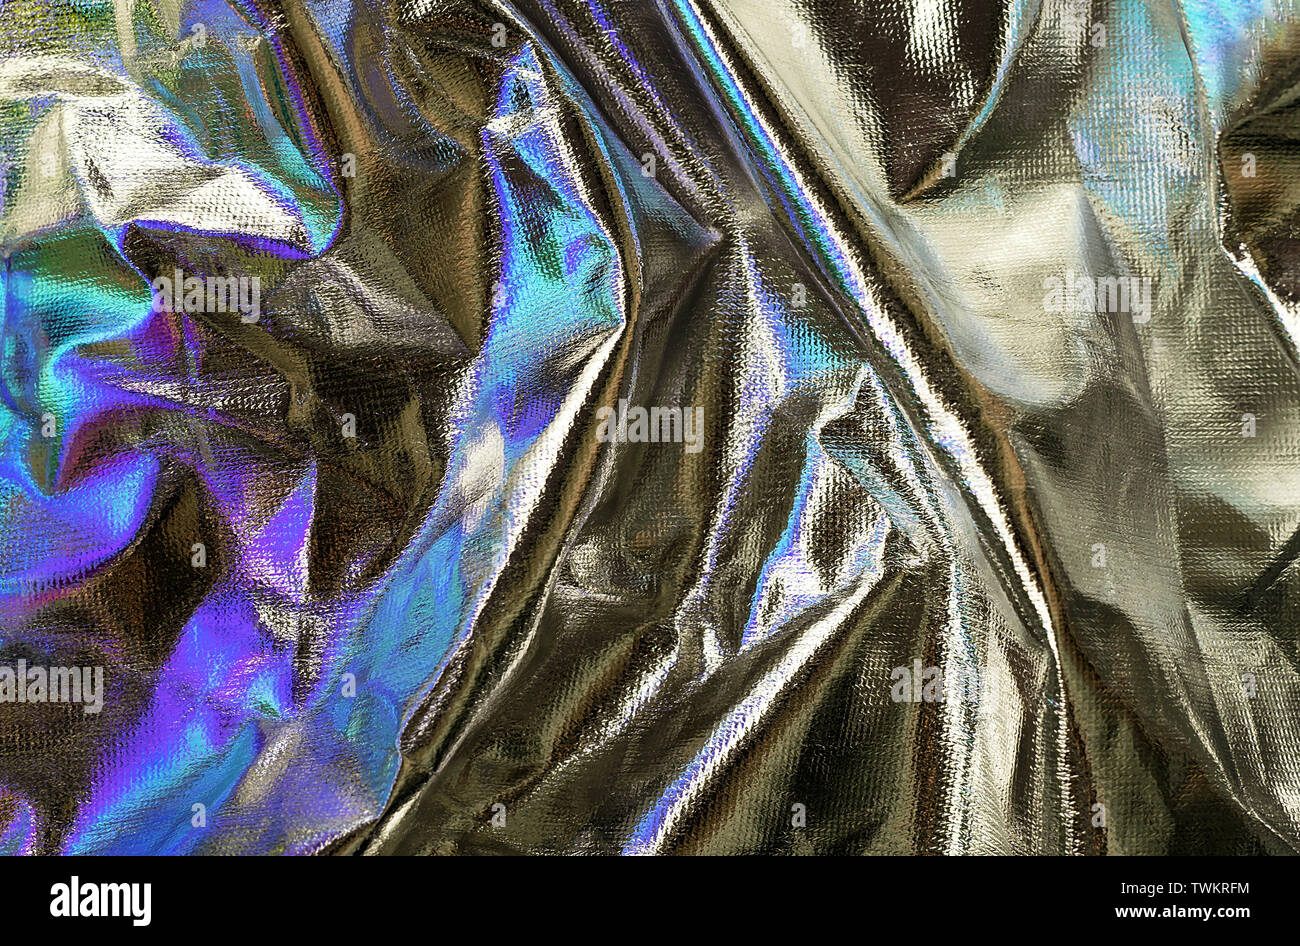 Textured silver foil background with shiny crumpled surface and turquoise and violet reflects. Stock Photo